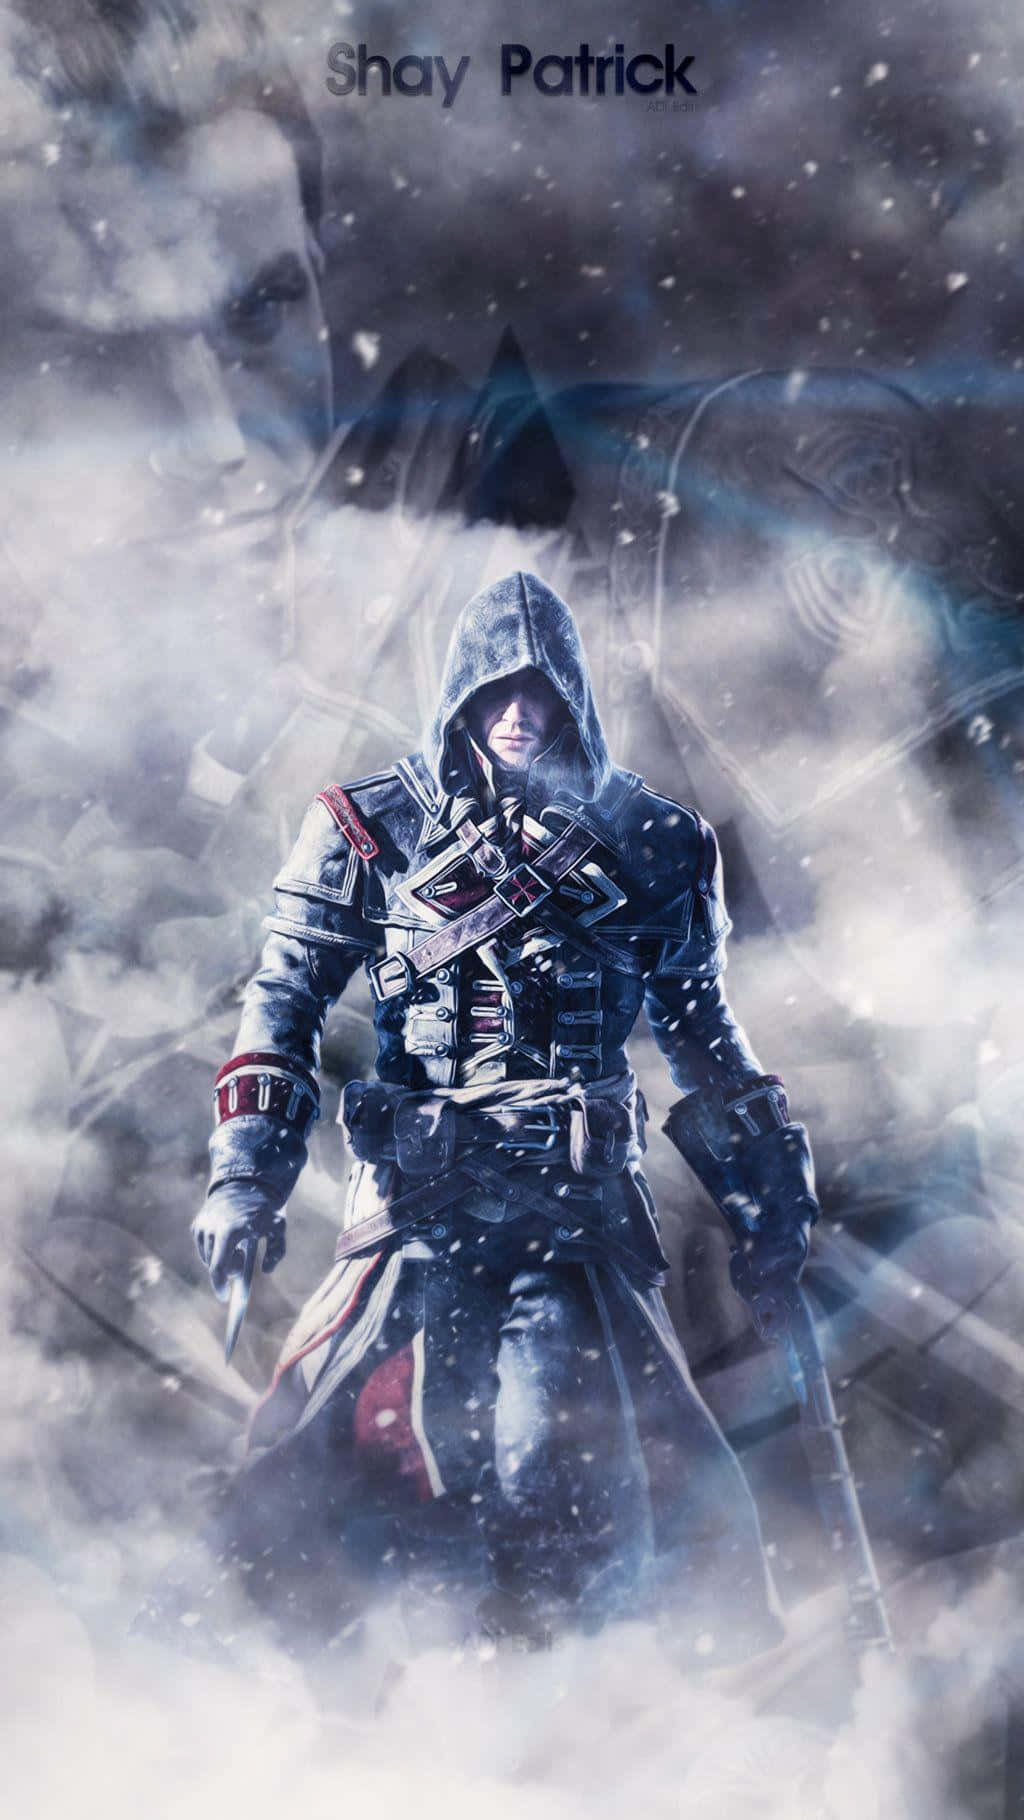 Play Assassins Creed On The Go - Experience Open World Action On Your Iphone!